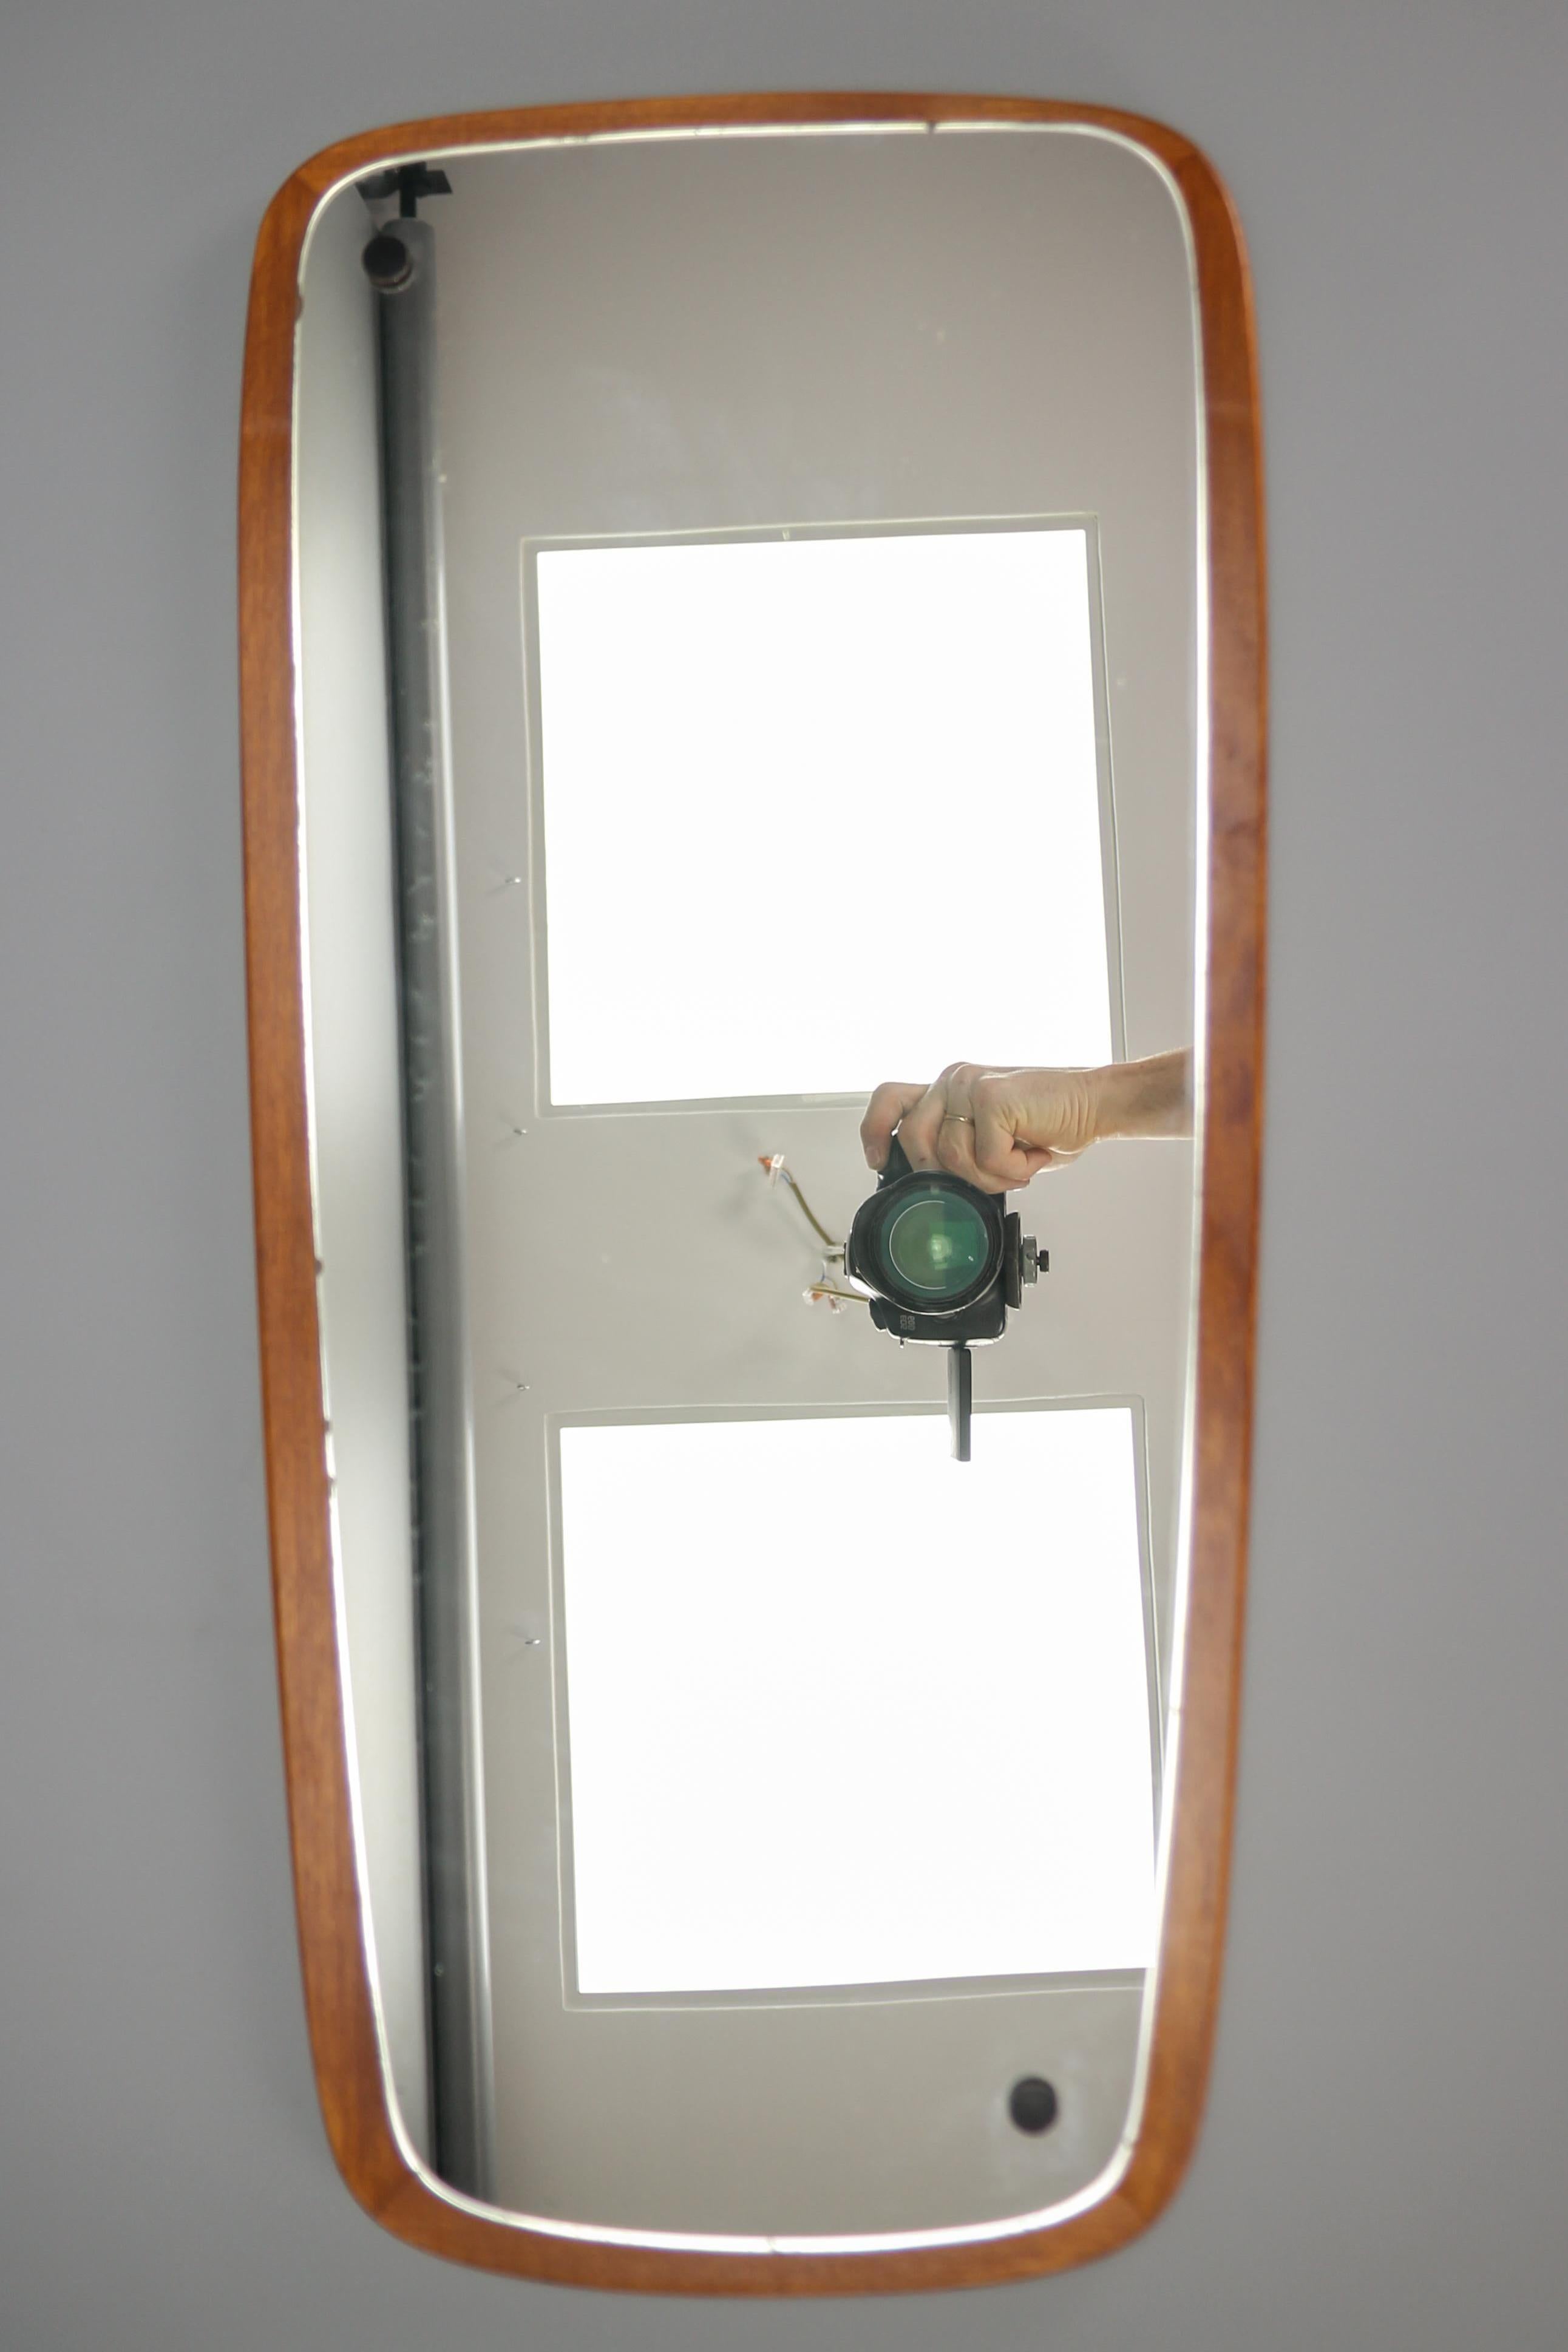 A stylish Mid-Century Modern Danish design wall mirror from the 1960s. This lovely rectangular wall mirror features wooden framing with rounded corners.
Dimensions: height: 72 cm / 28.34 in; width: 34.5 cm / 13.58 in; depth: circa 2 cm / 0.78 in.